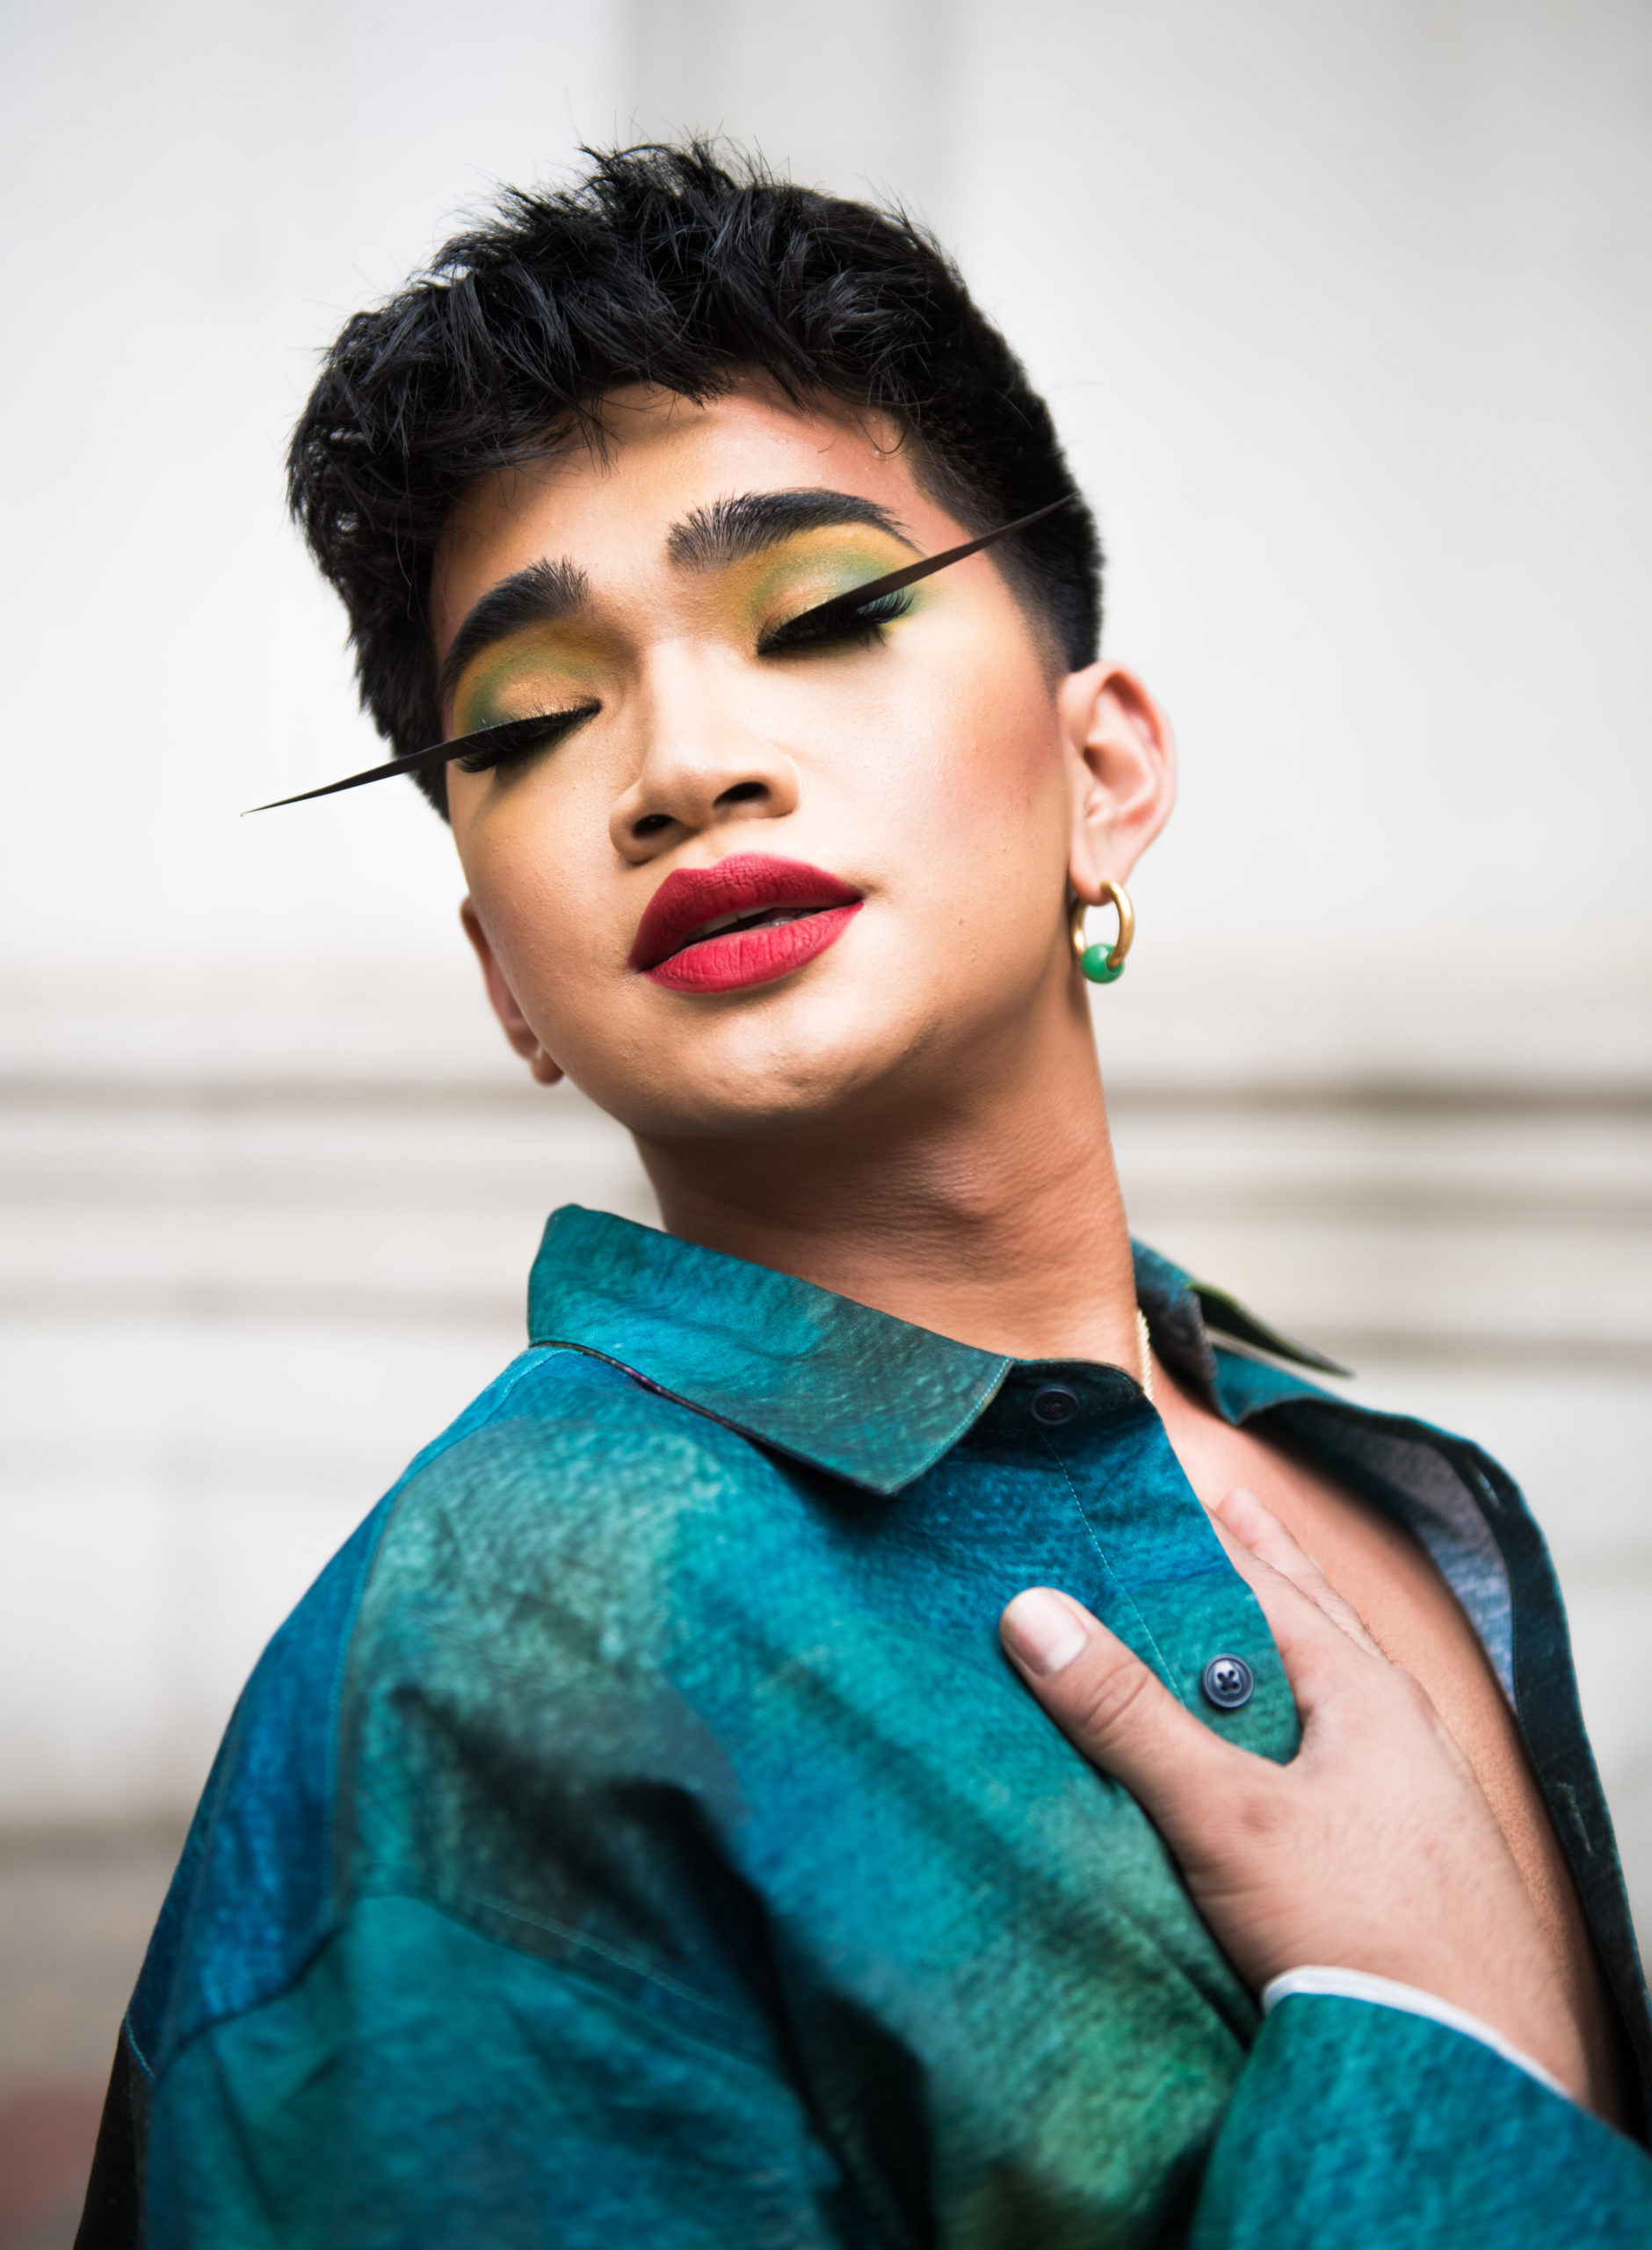 Bretman Rock Wants To Be The Most Famous Influencer - V Magazine